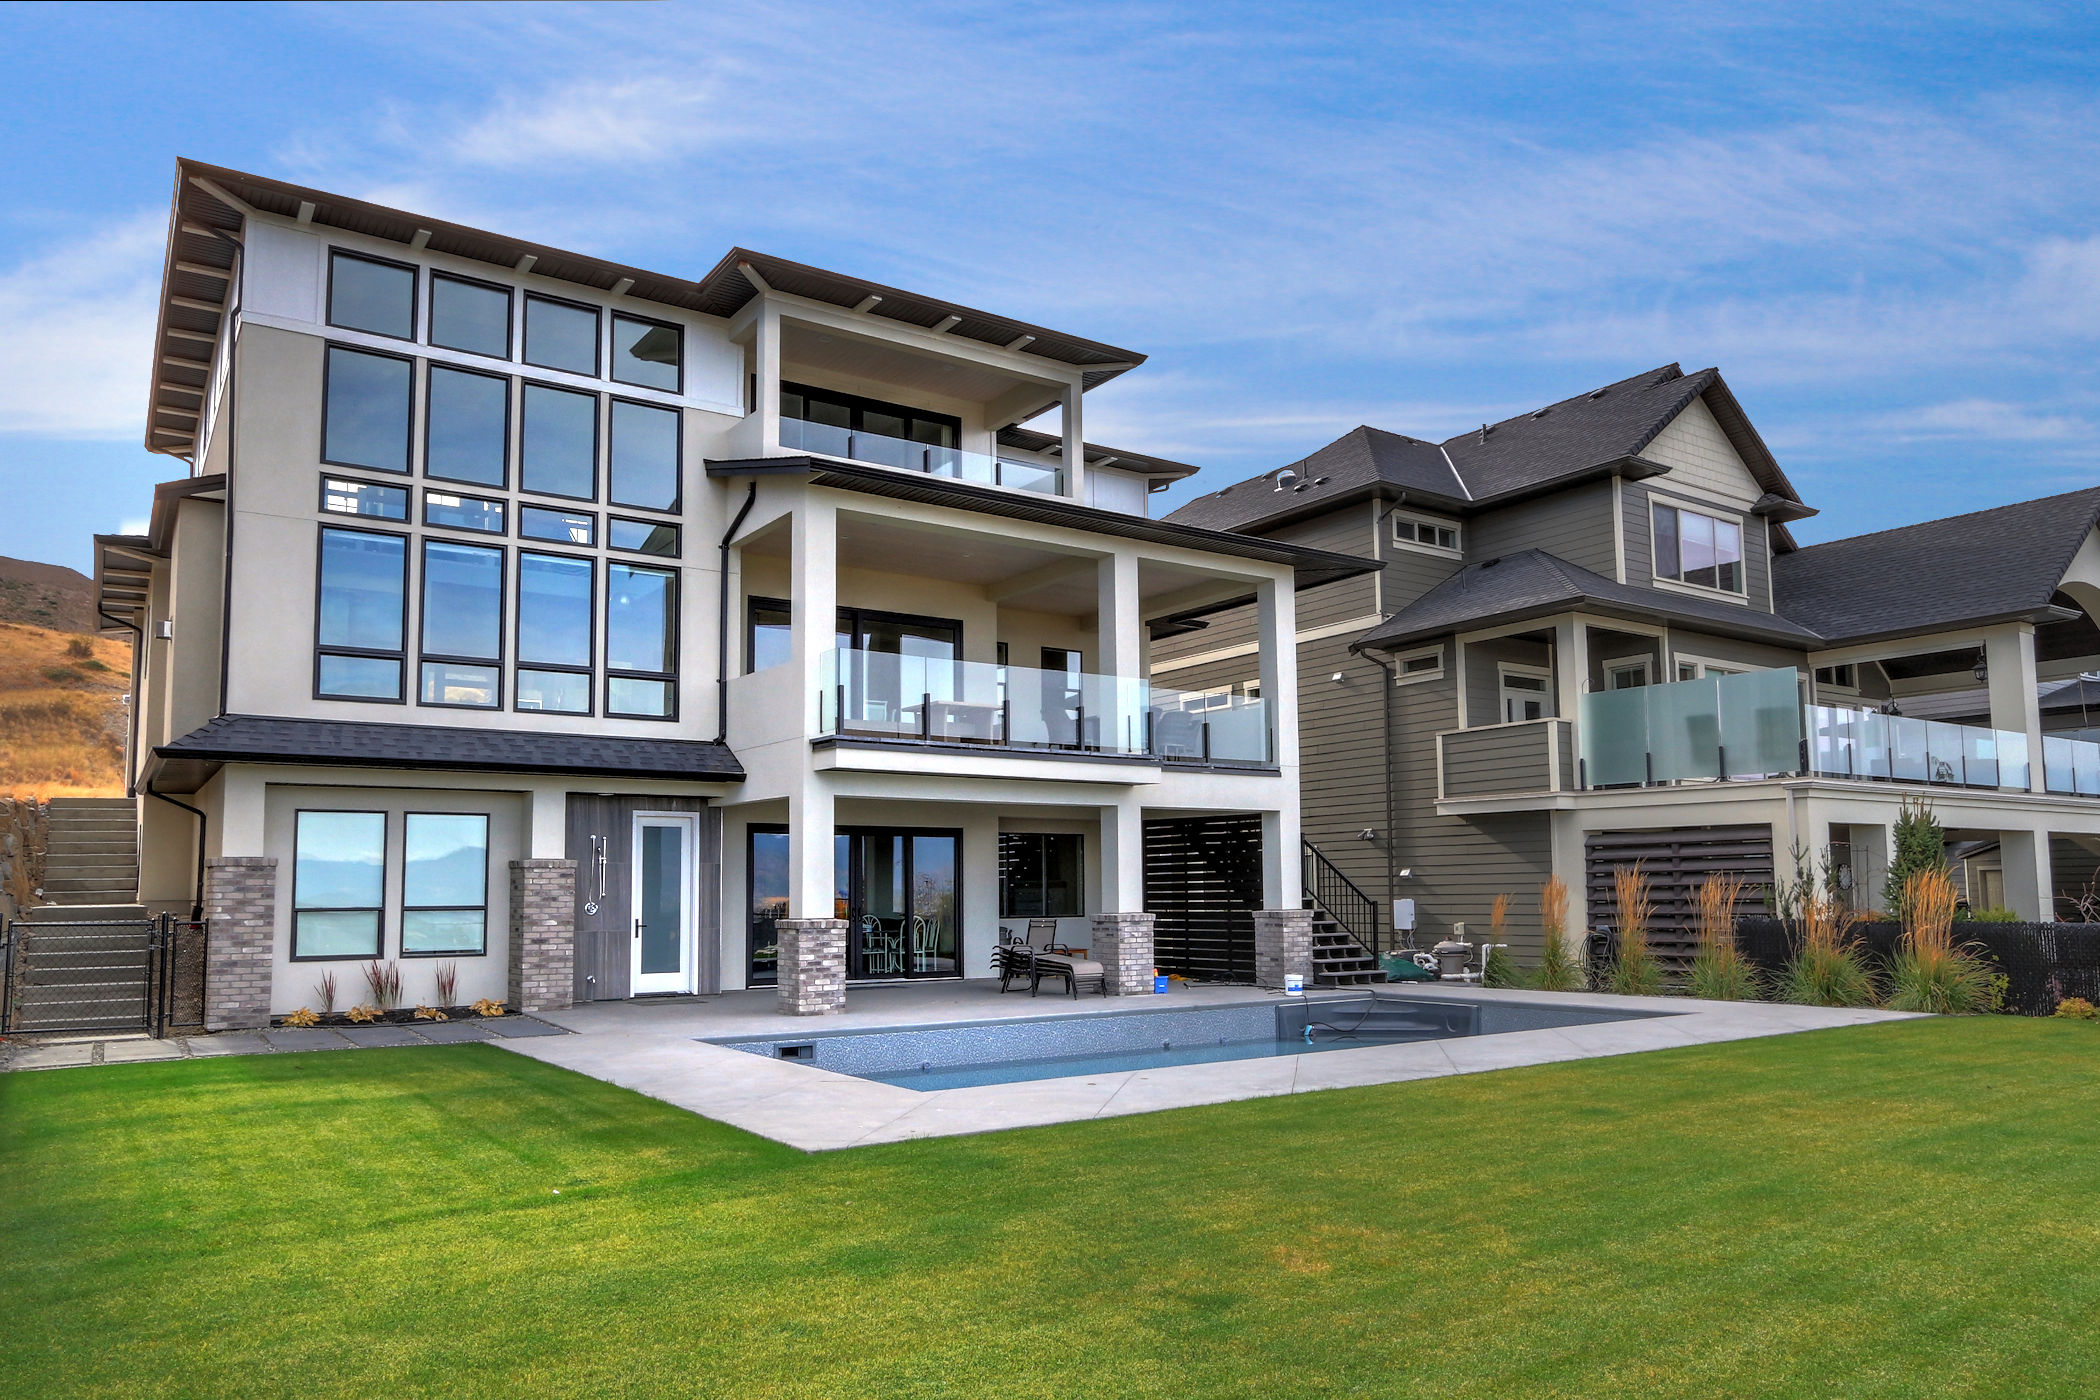 Smart Homes & Custom Home Building in the Digital Age